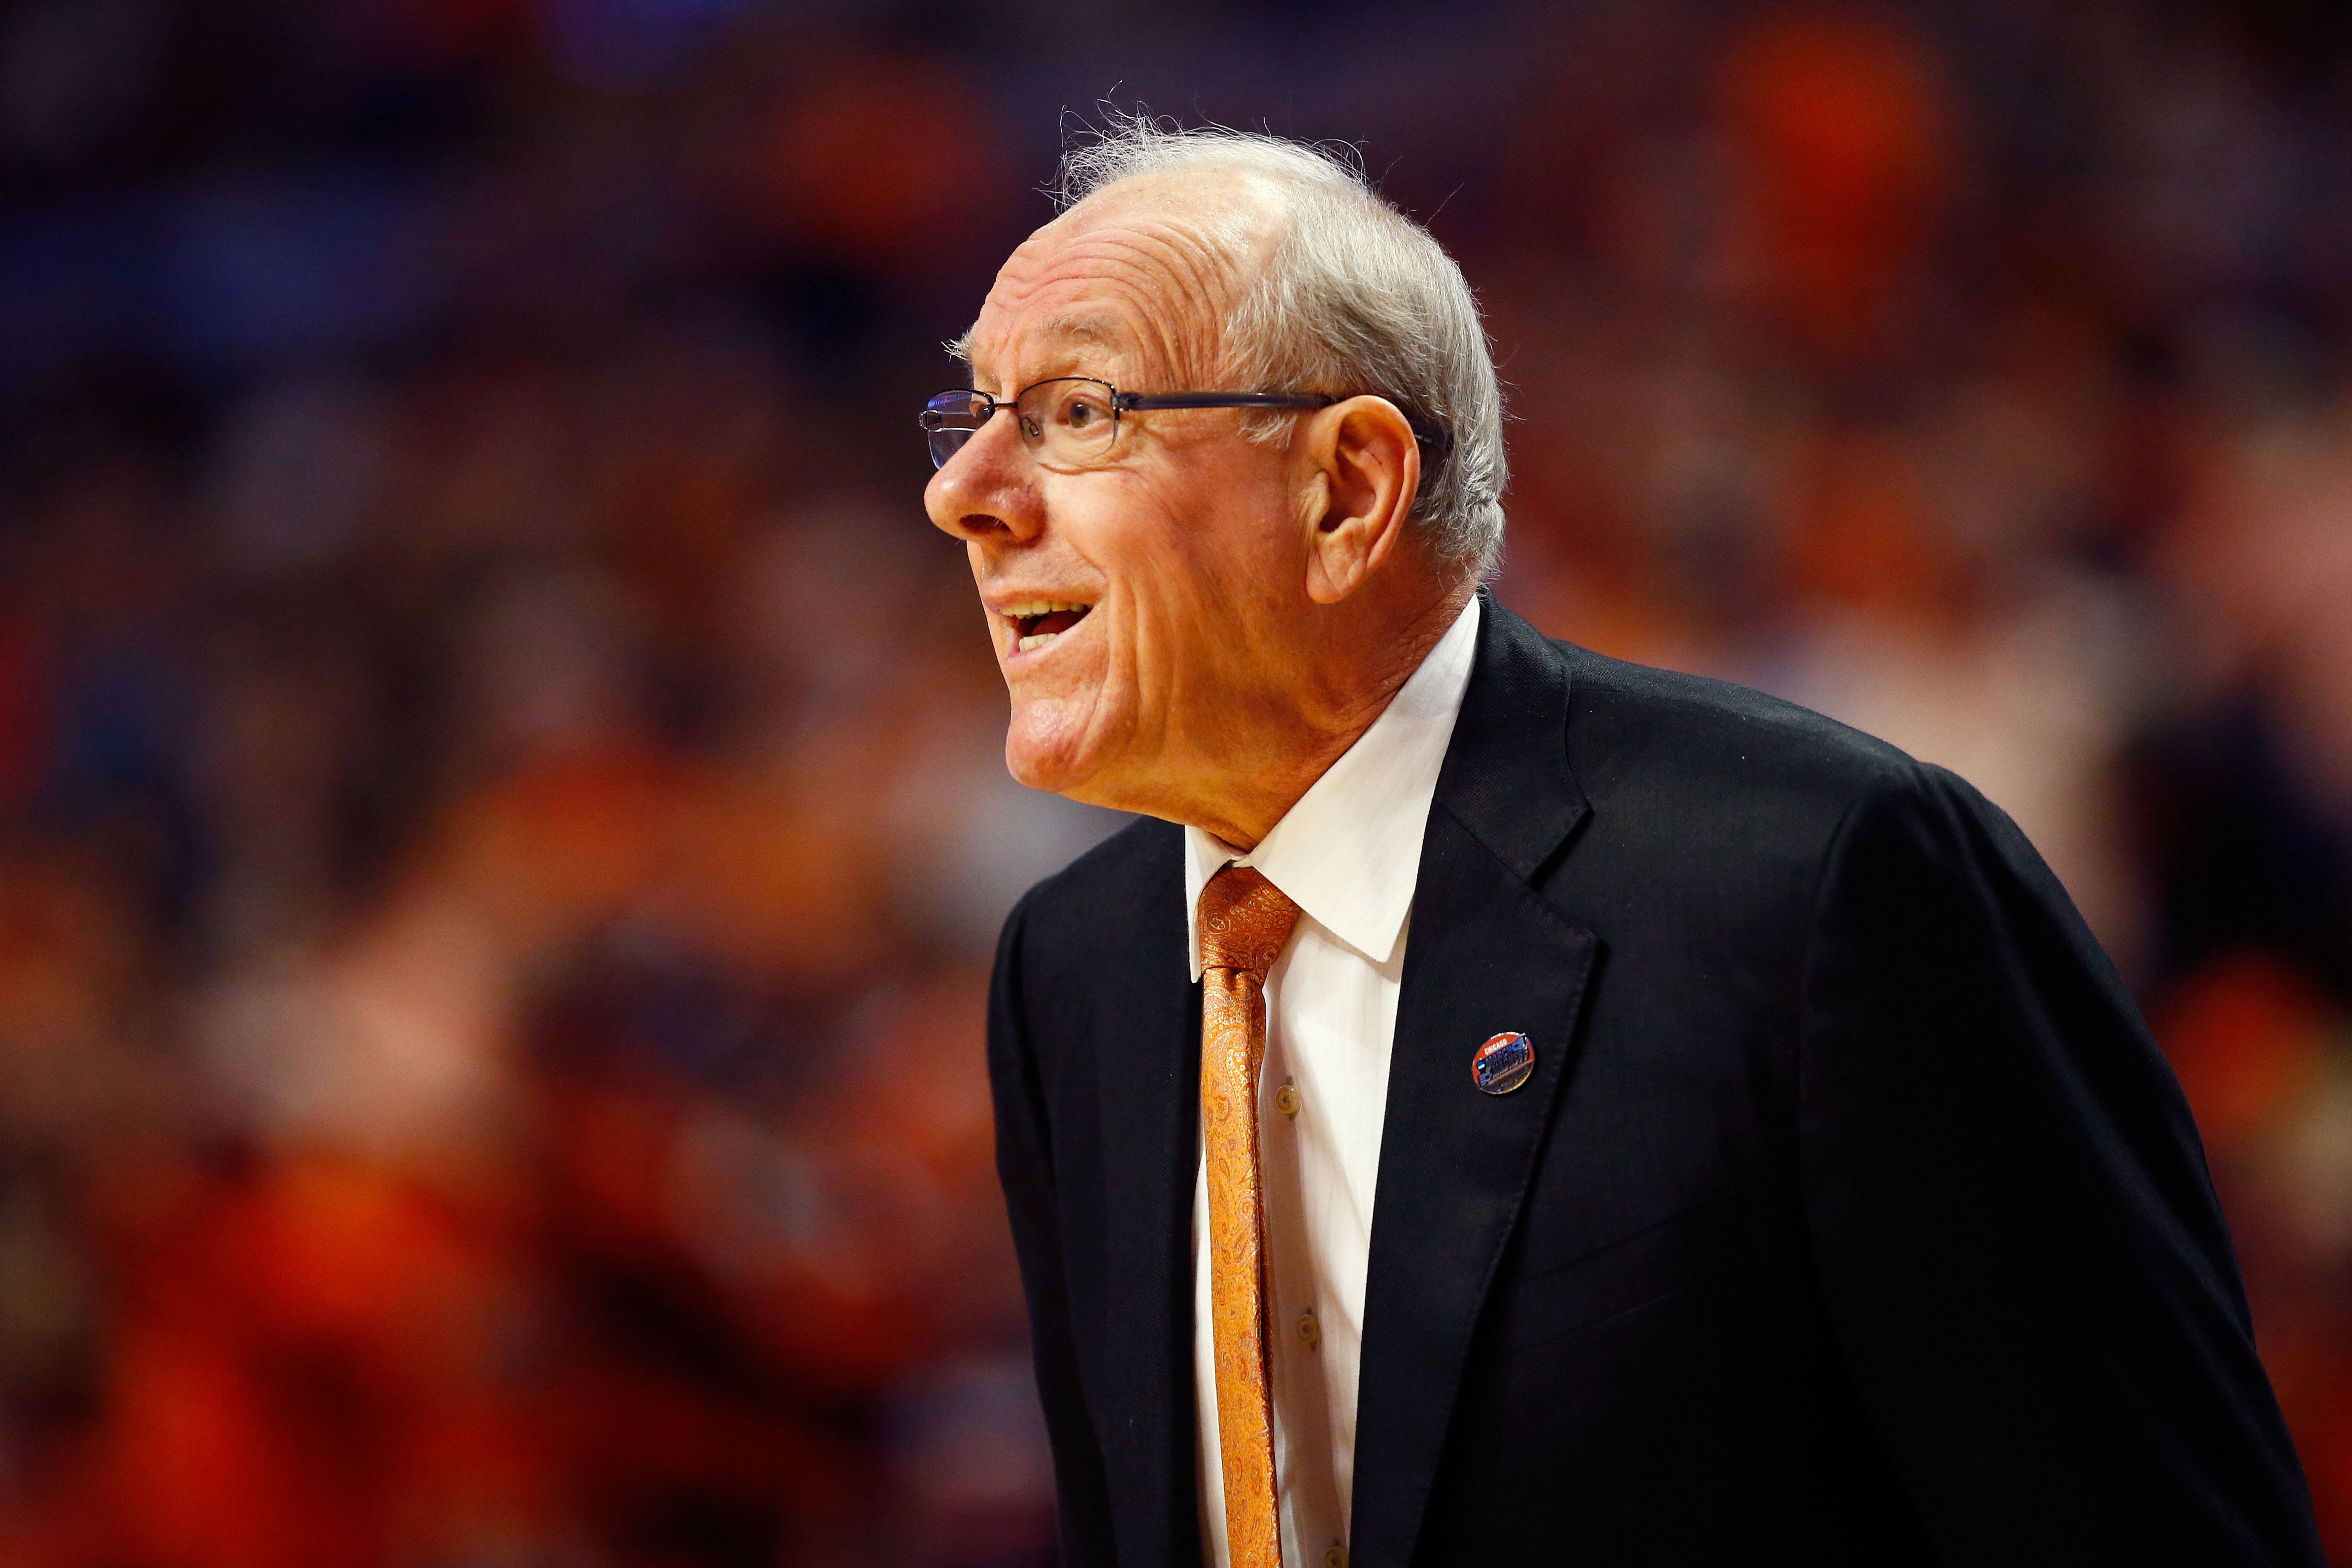 Jim Boeheim instructs his players from the sideline.